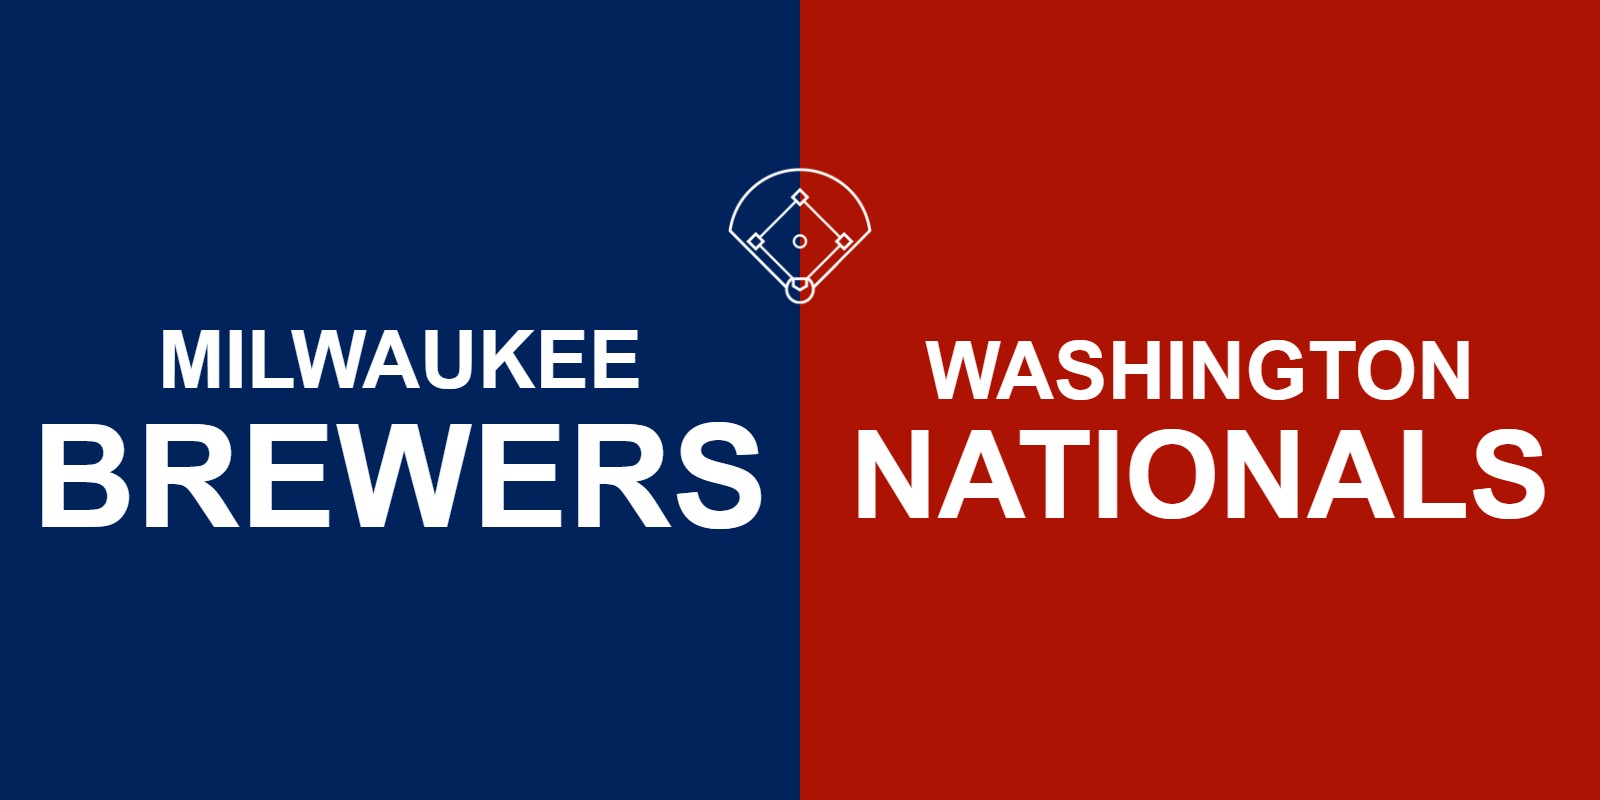 Brewers vs Nationals